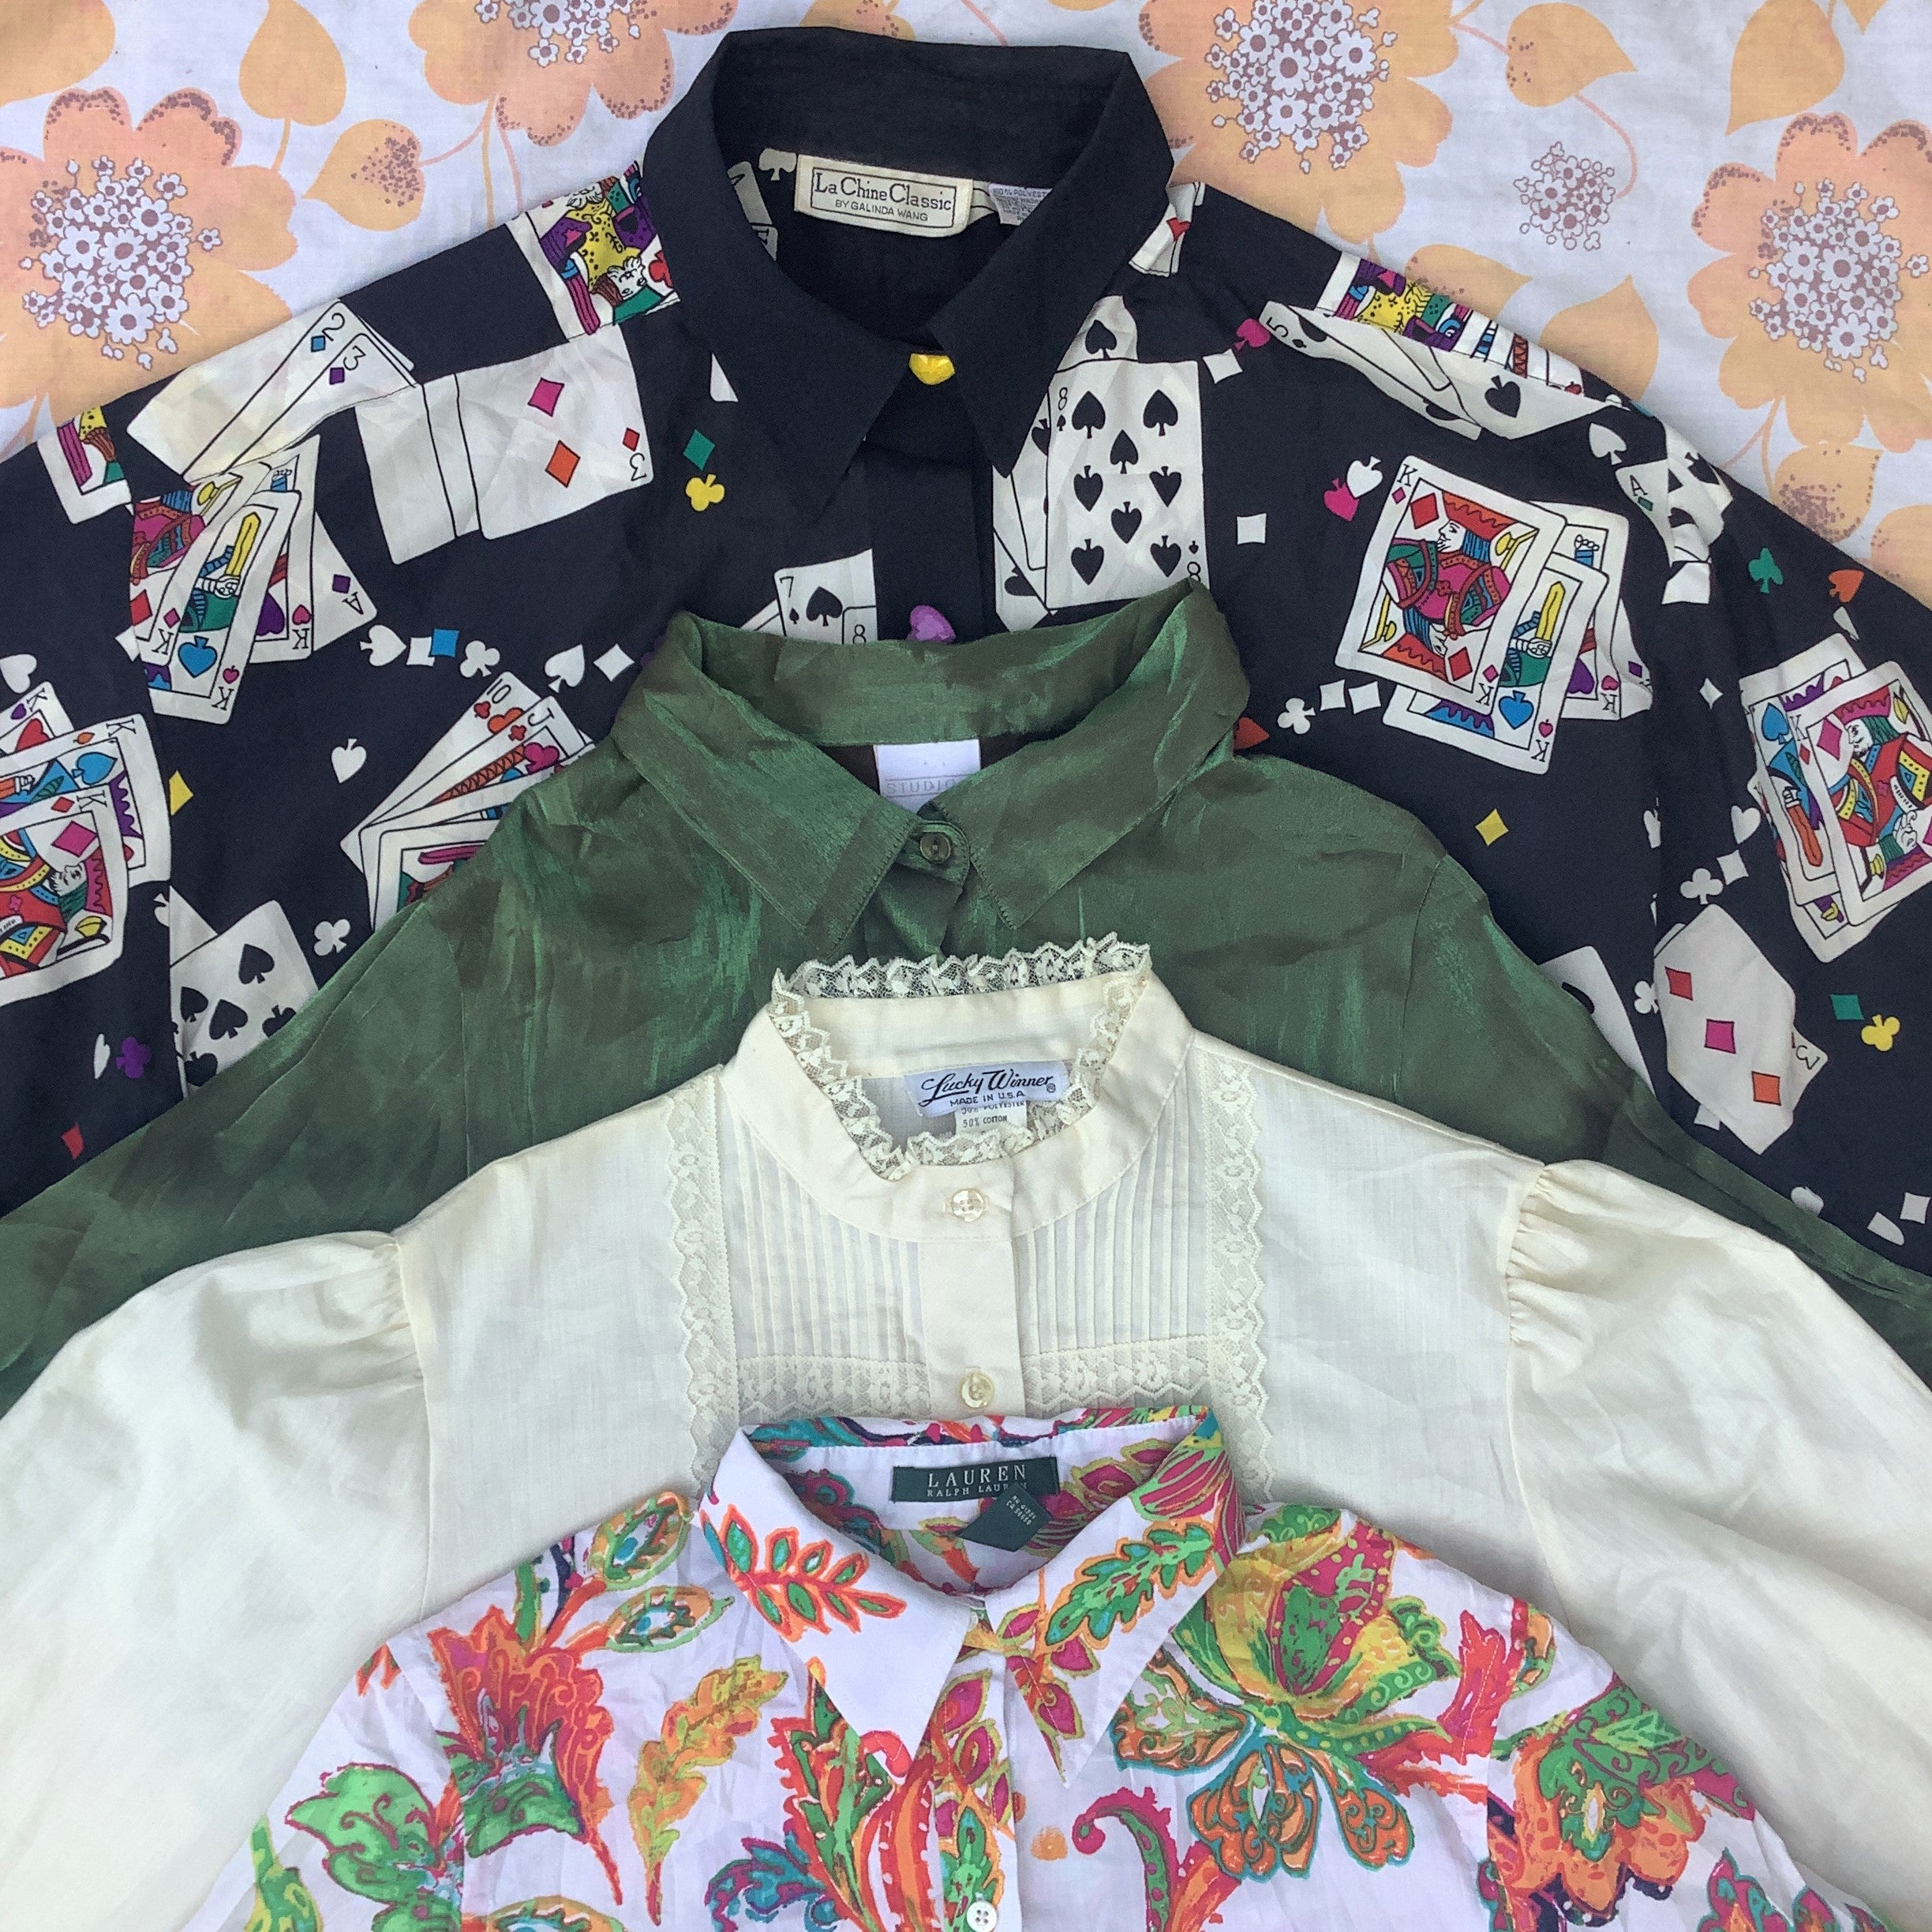 Wholesale vintage and secondhand mixed bundles of long sleeve blouses. Choose from Grade A, B or ungraded to bulk buy per kilo, piece or bale. Handpick available in Sussex warehouse of Brighton's biggest vintage retailer or shop at monthly kilo sale events.